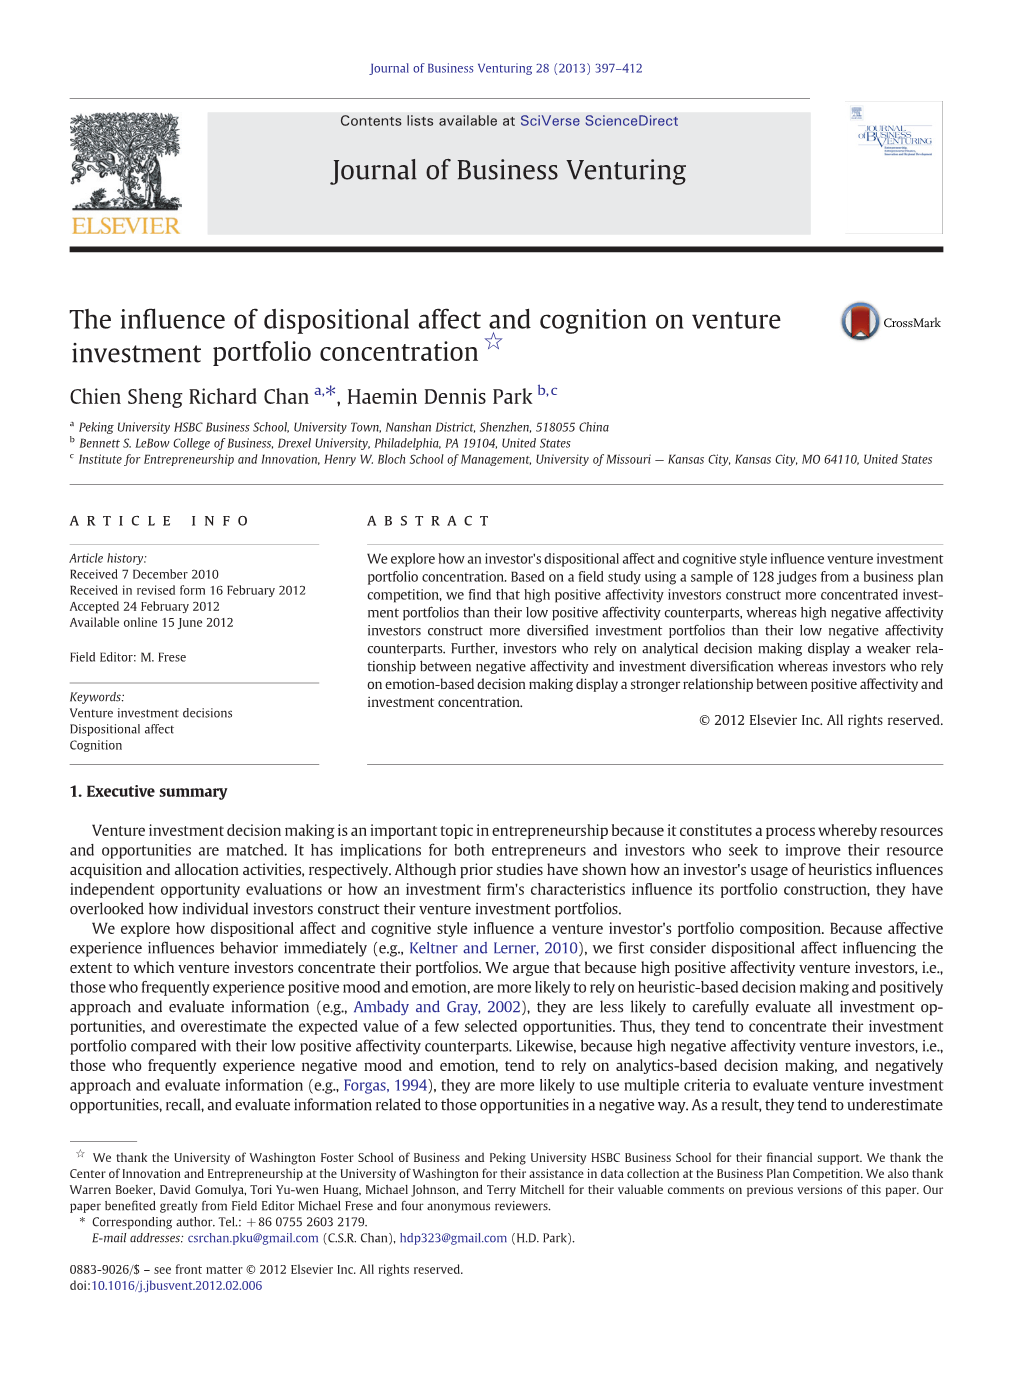 The Influence of Dispositional Affect and Cognition on Venture Investment Portfolio Concentration